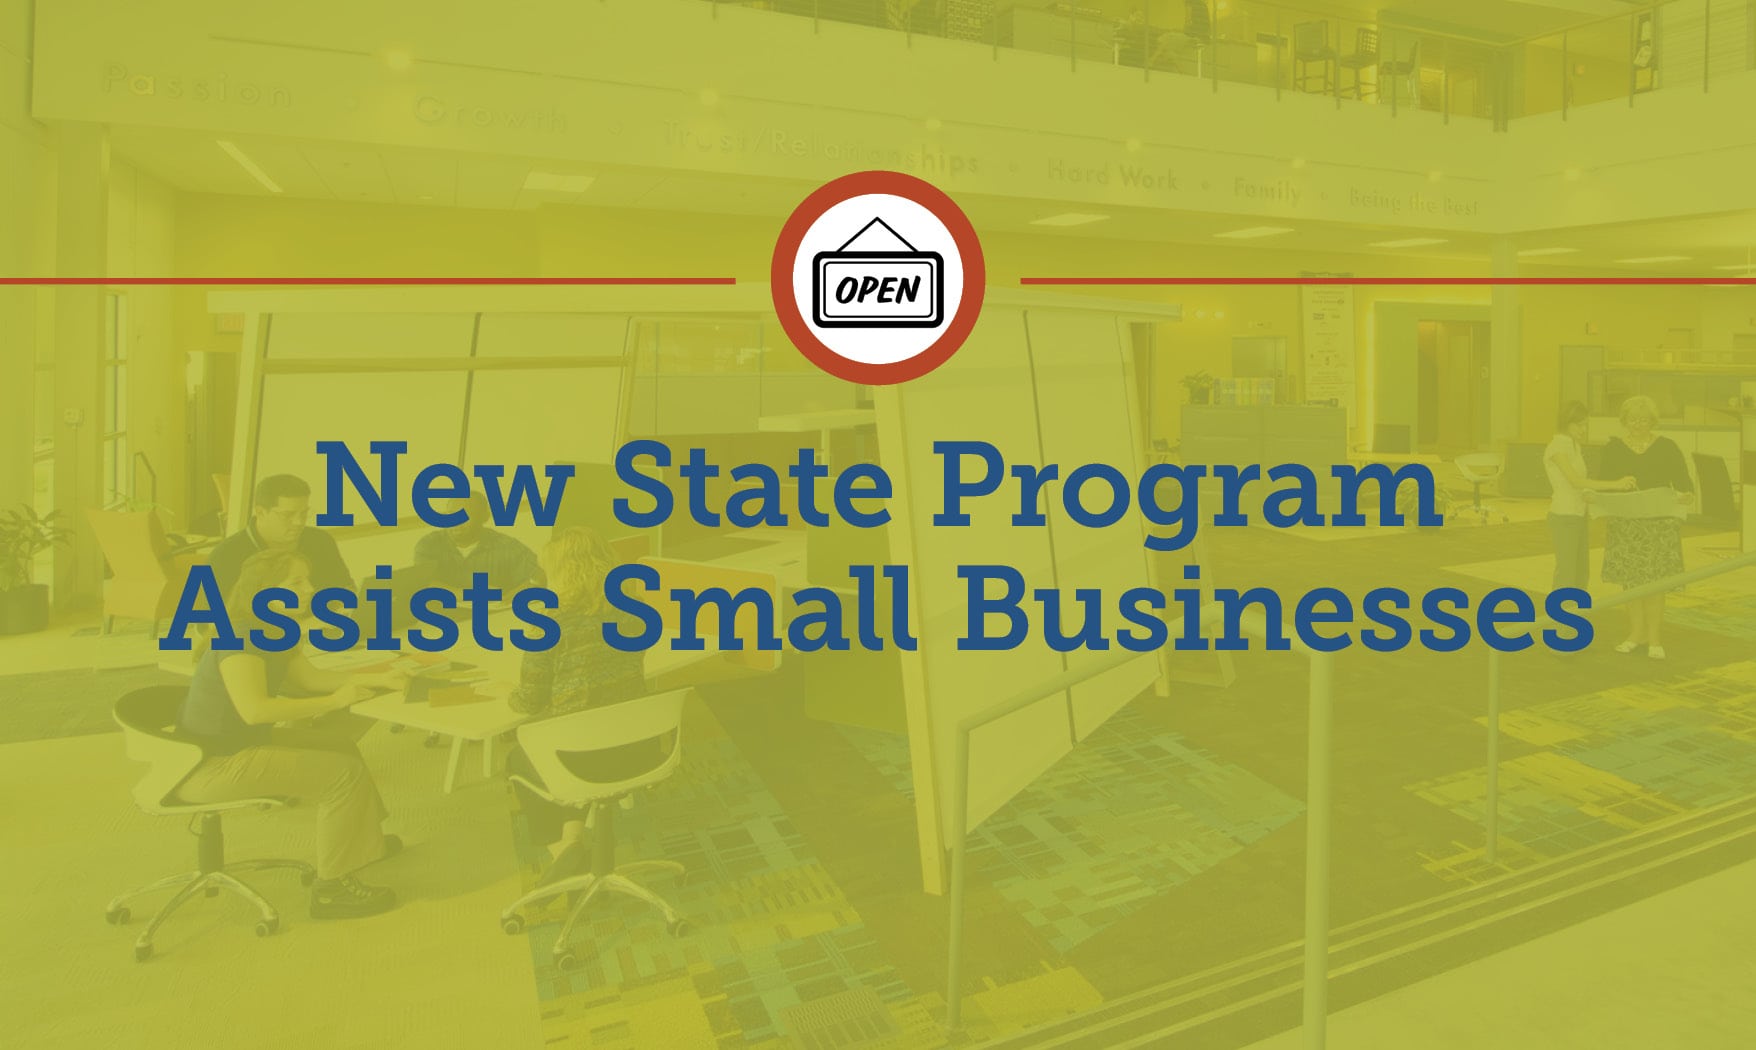 New state program assists small businesses